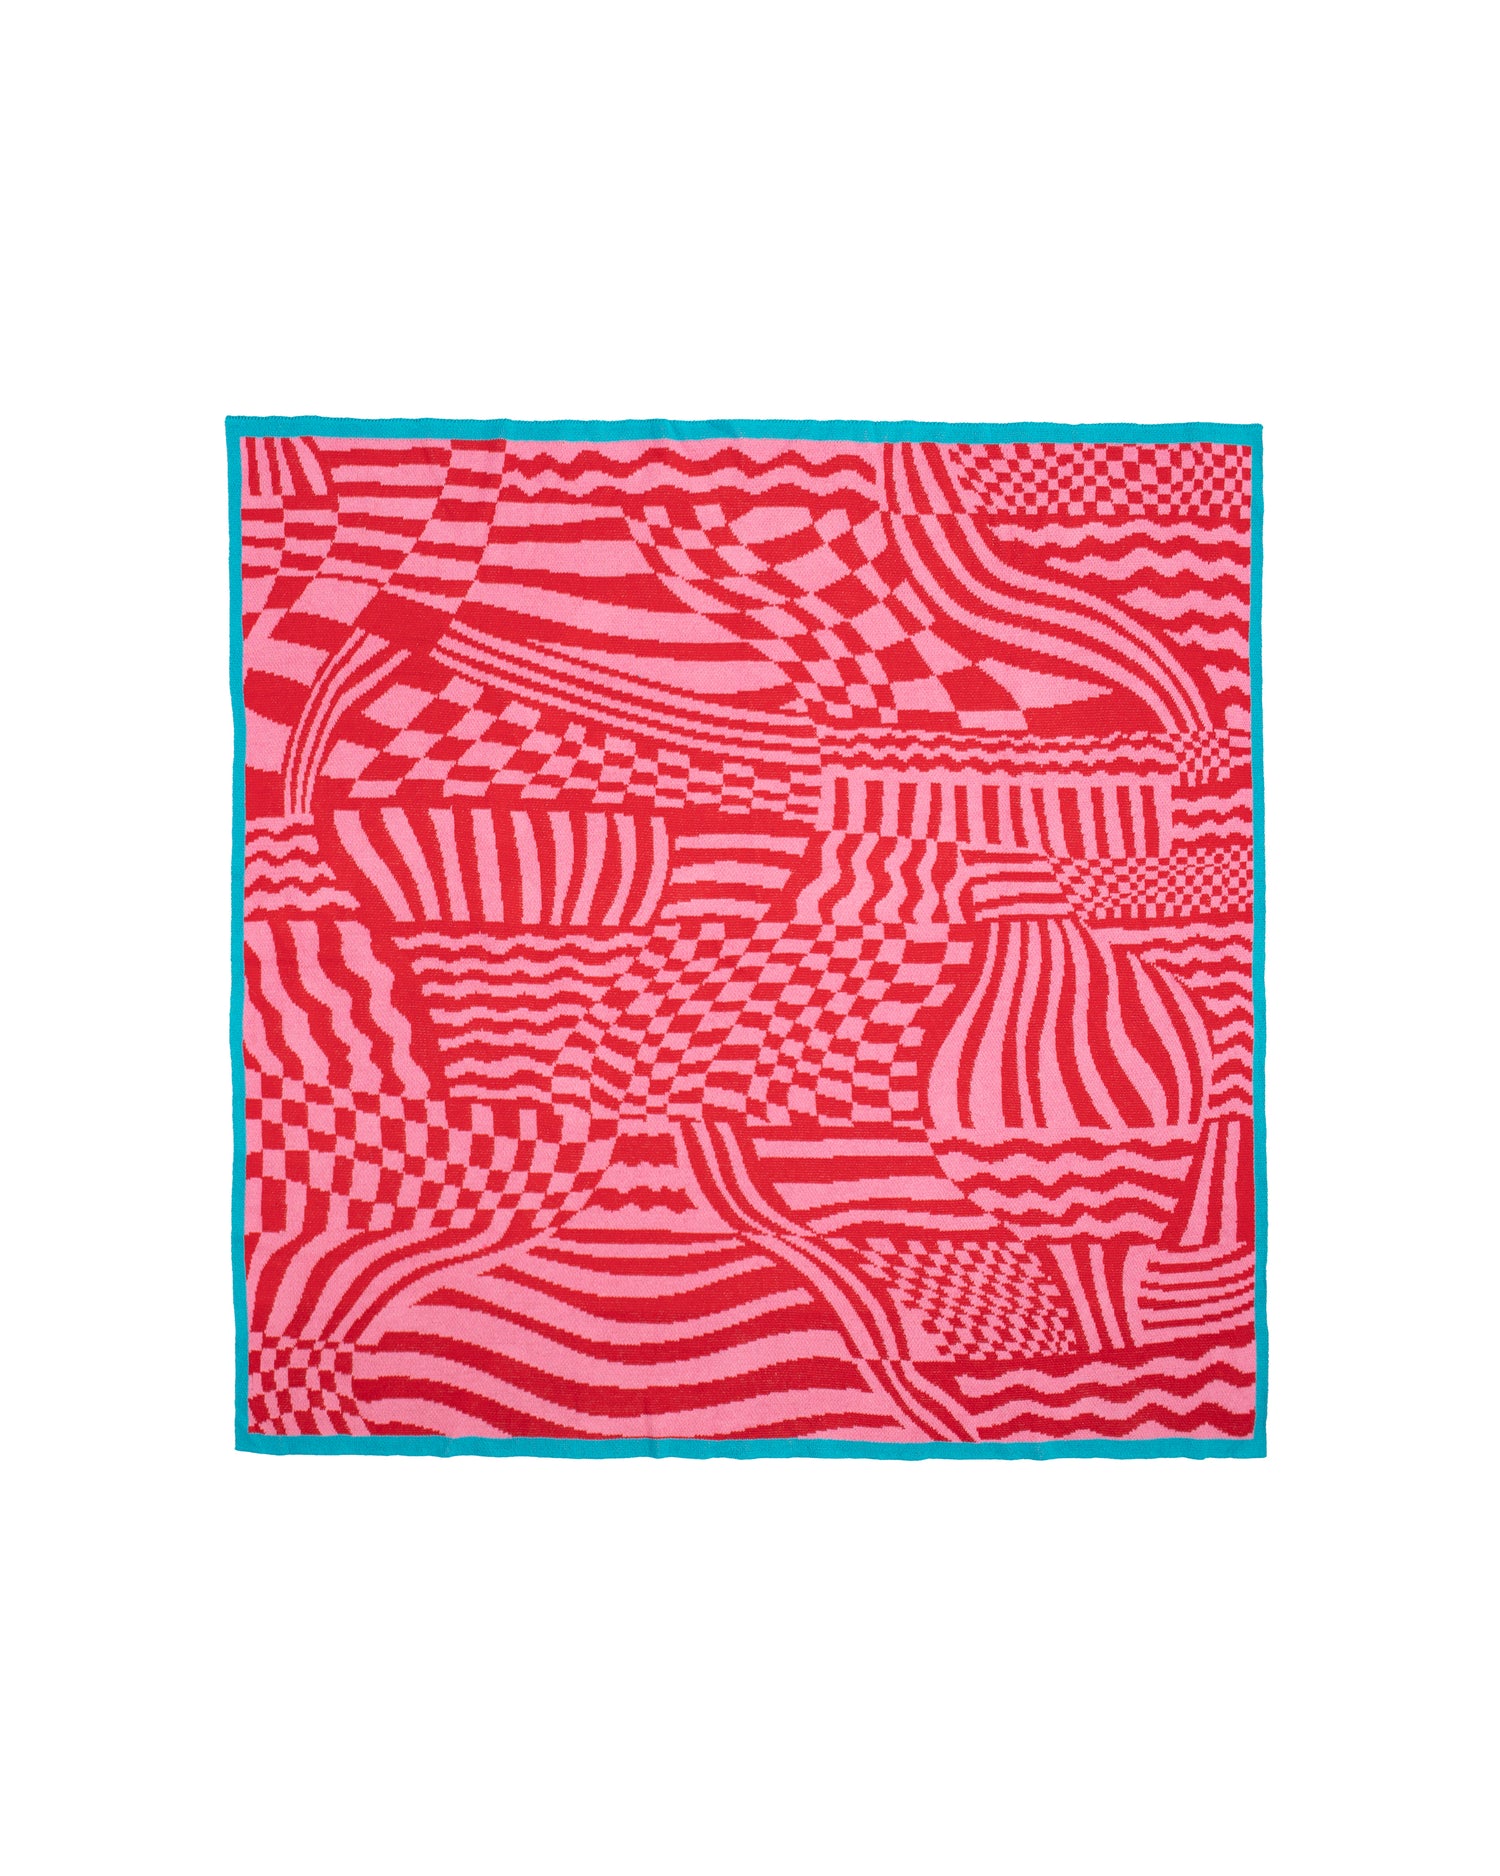 Image of the Wiggles and Waves blanket with a pink and red abstract design consisting of checkerboards, stripes and waves. The border around this blanket is a teal color. Knit blanket that is 60" by 60”.